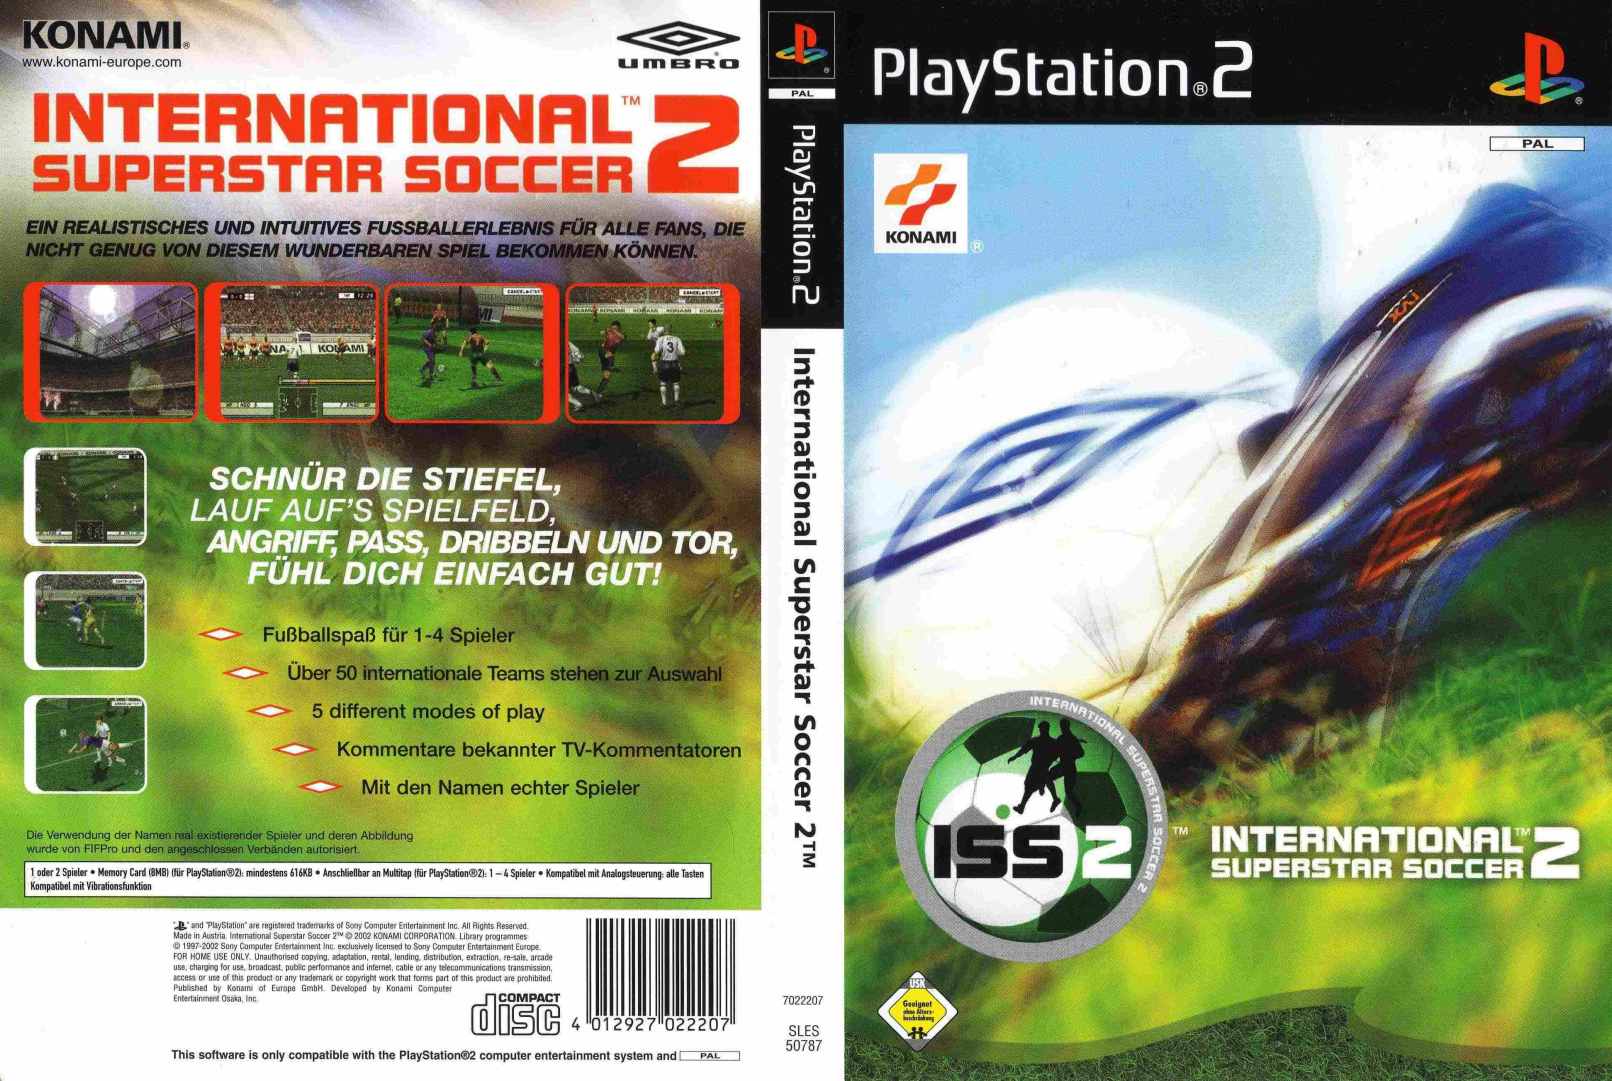 International Superstar Soccer 2 Pal Ps2 Full Playstation 2 Covers Cover Century Over 500 000 Album Art Covers For Free